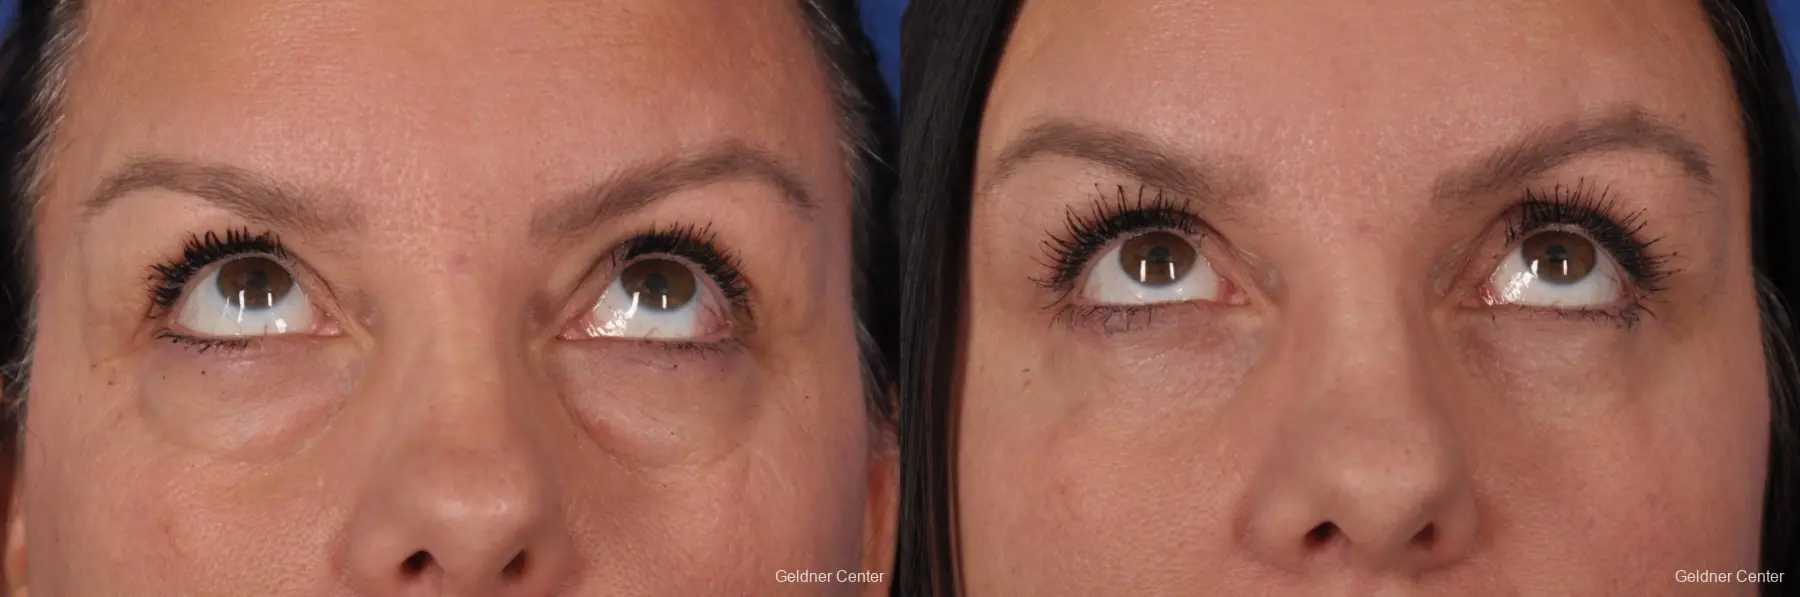 Blepharoplasty: Patient 1 - Before and After 2